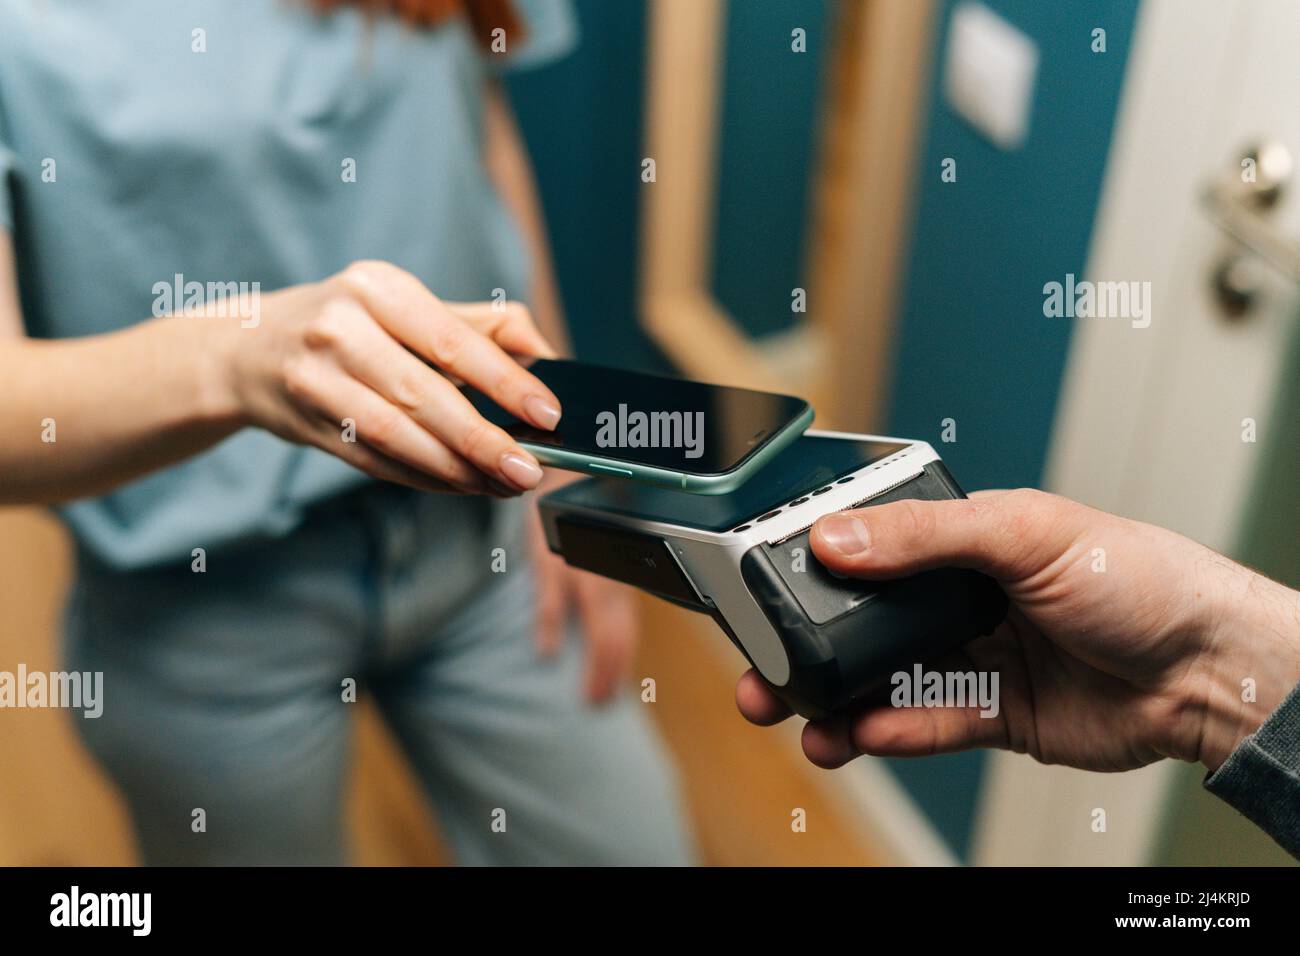 Close-up high-angle view of unrecognizable courier male giving POS wireless terminal to making contactless payment using mobile phone to young female Stock Photo